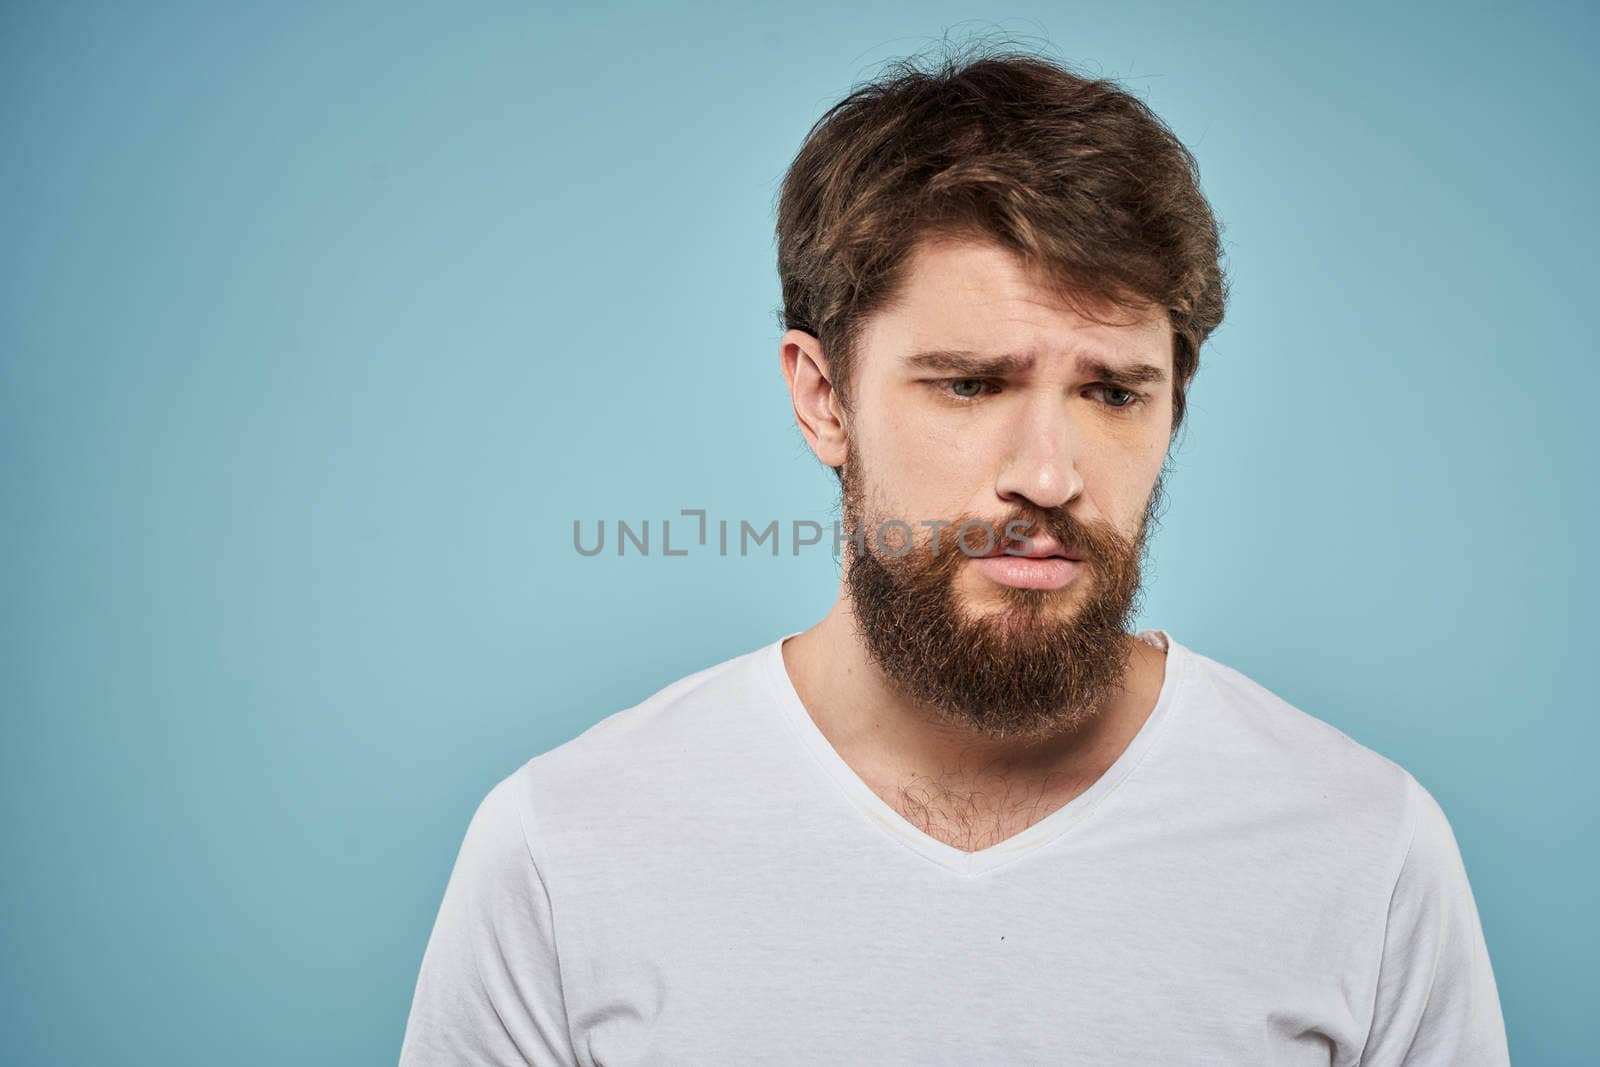 Bearded man emotions white t-shirt lifestyle gestures with hands blue backgrounds by SHOTPRIME